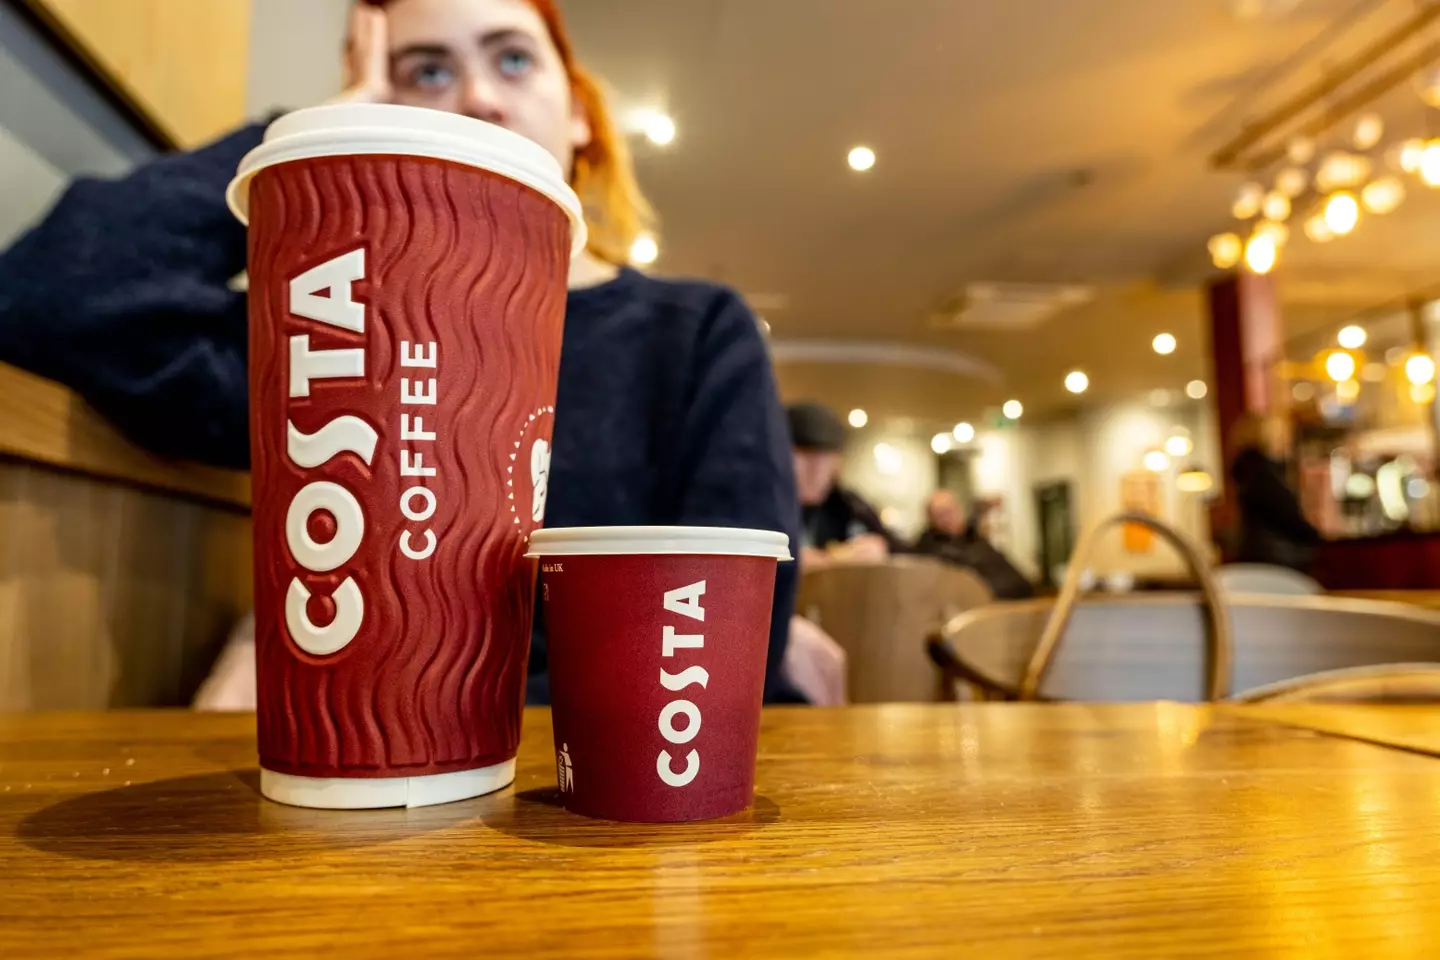 Costa Coffee has apologised after giving customers 'dangerous' advice on social media (